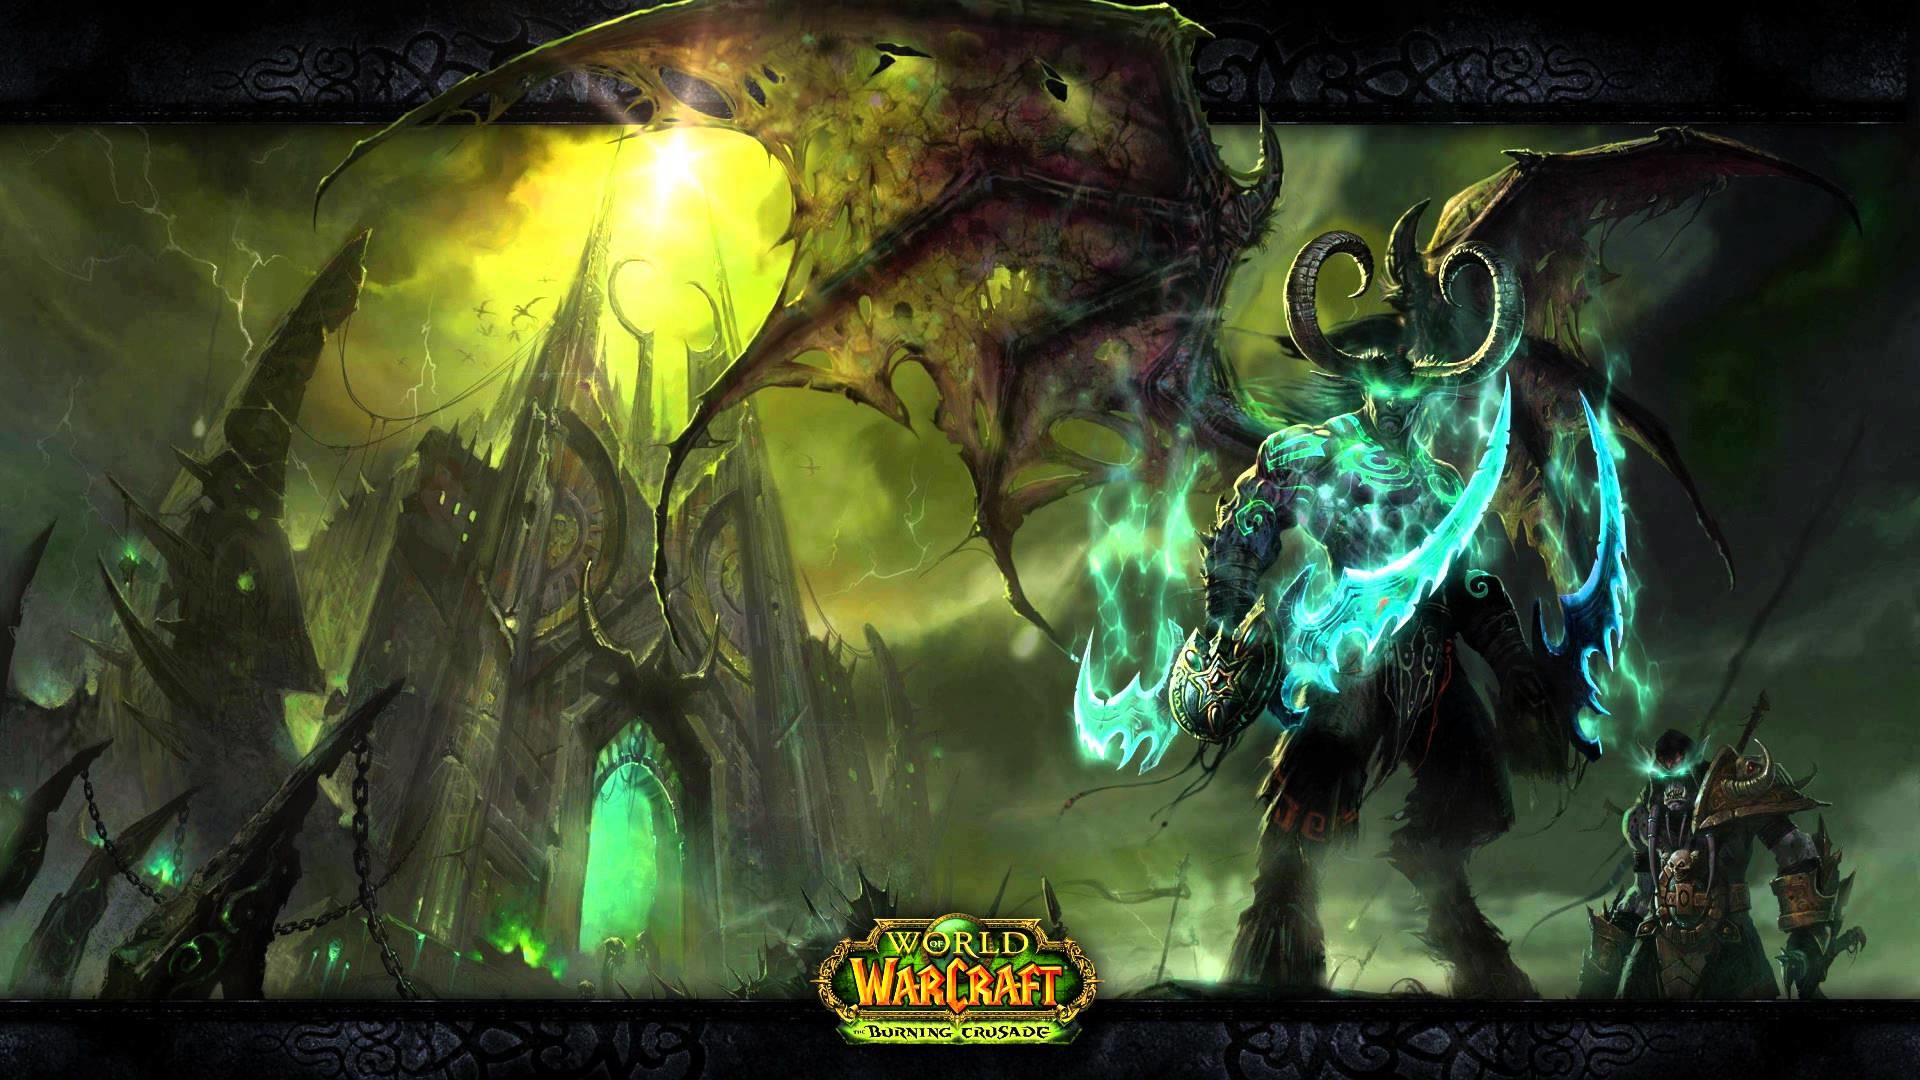 1920x1080 World of Warcraft - Illidan and the Black Temple - Motion Background -  YouTube